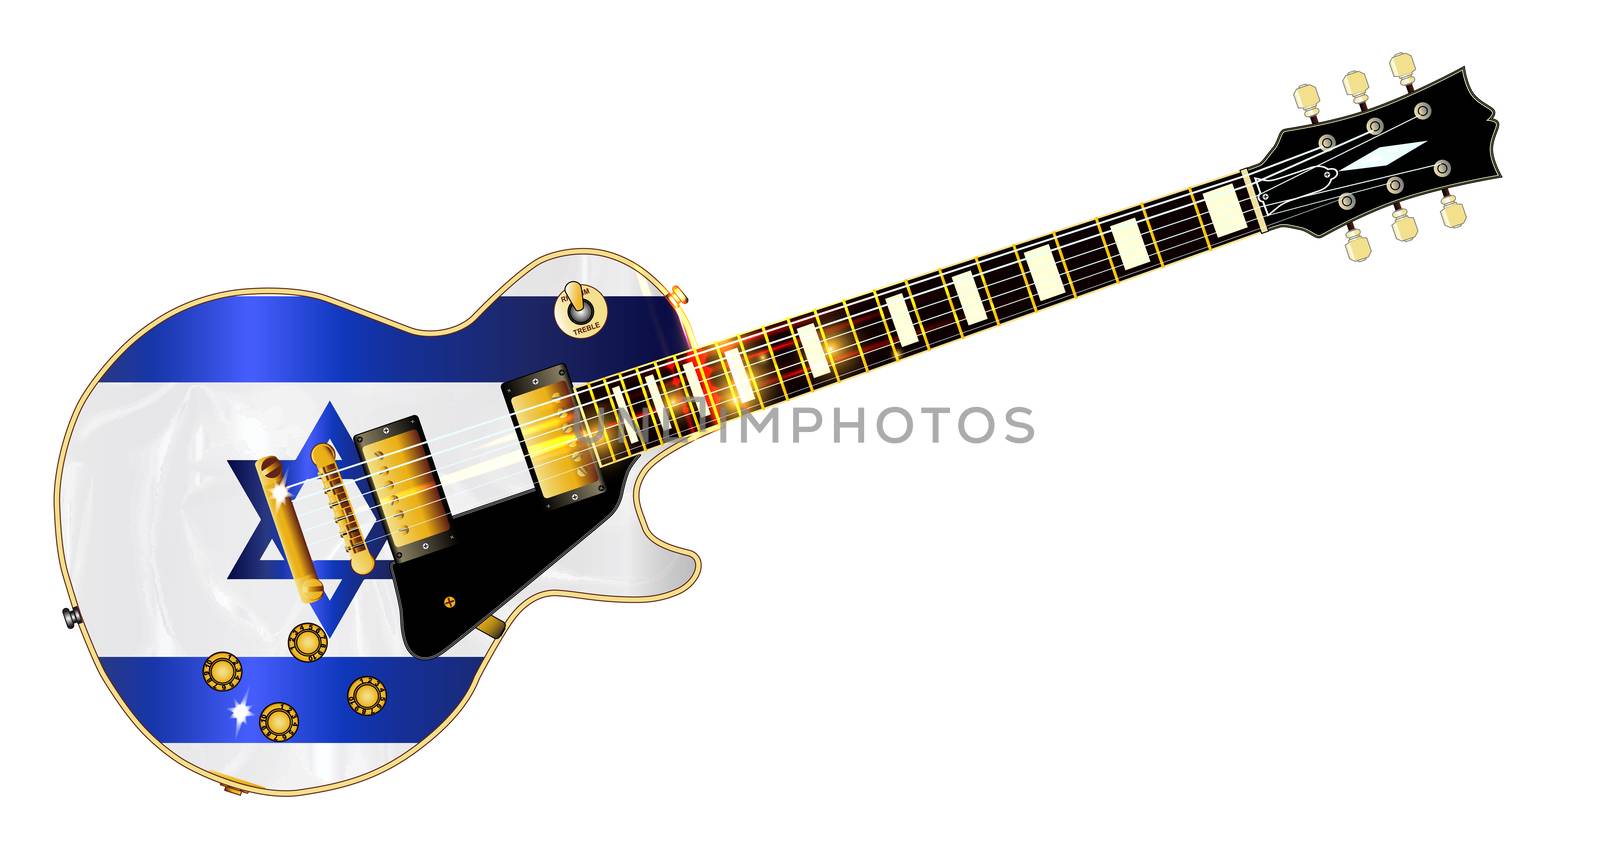 The definitive rock and roll guitar with the Israeli flag isolated over a white background.